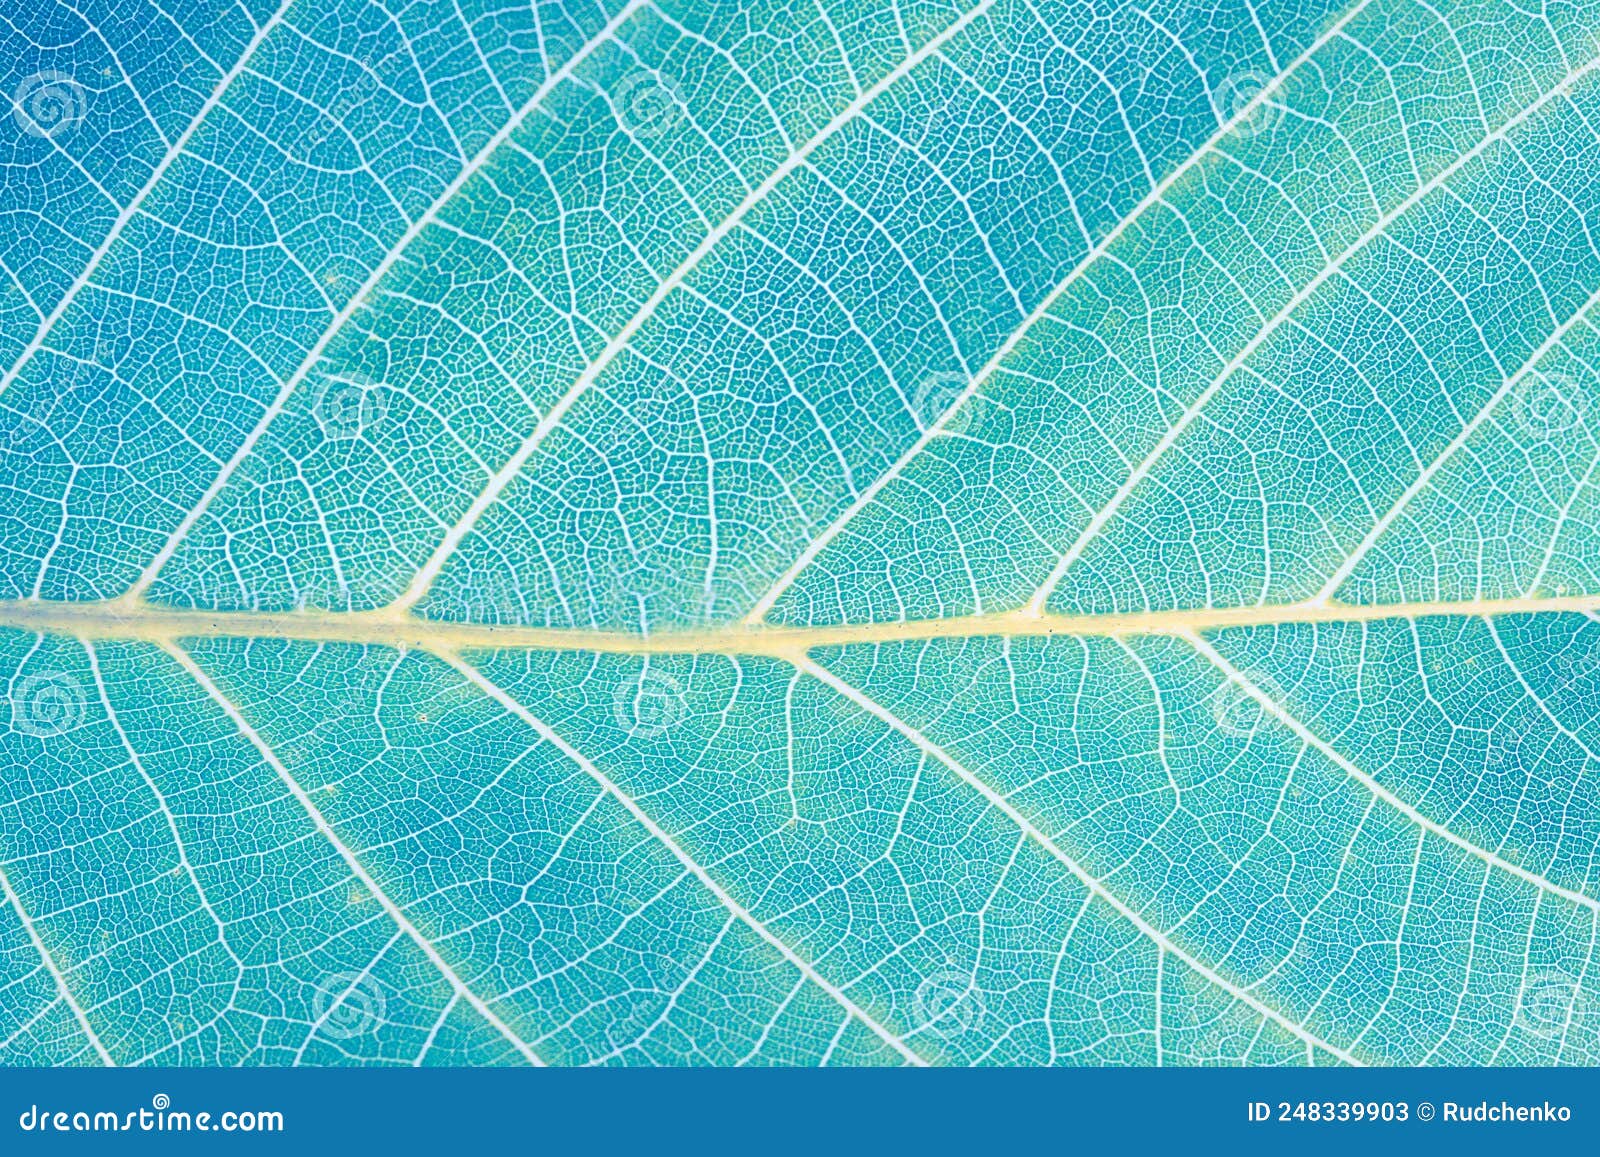 macro leaf texture. abstract nature background. saturated turquoise color